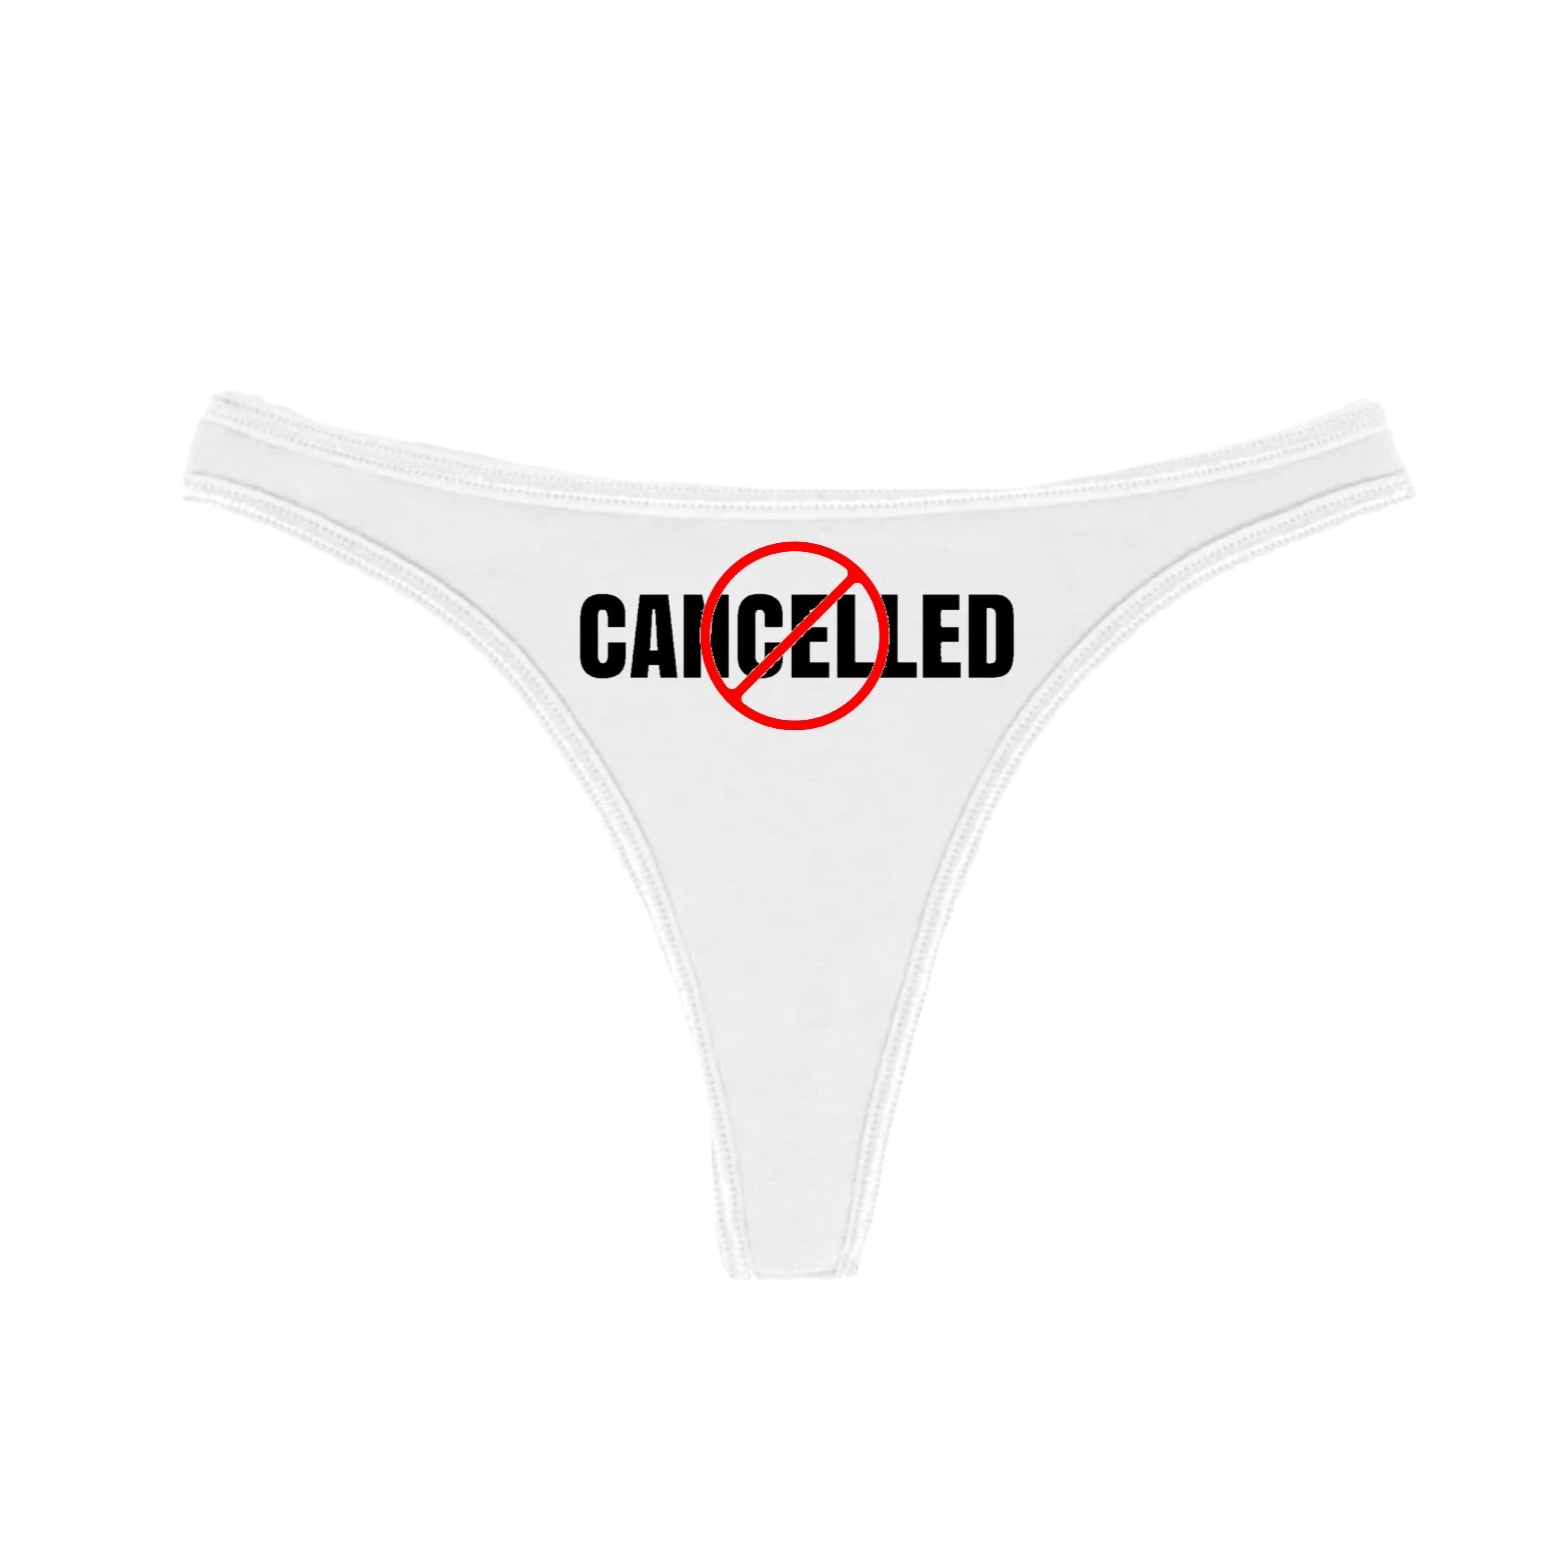 CANCELLED thong